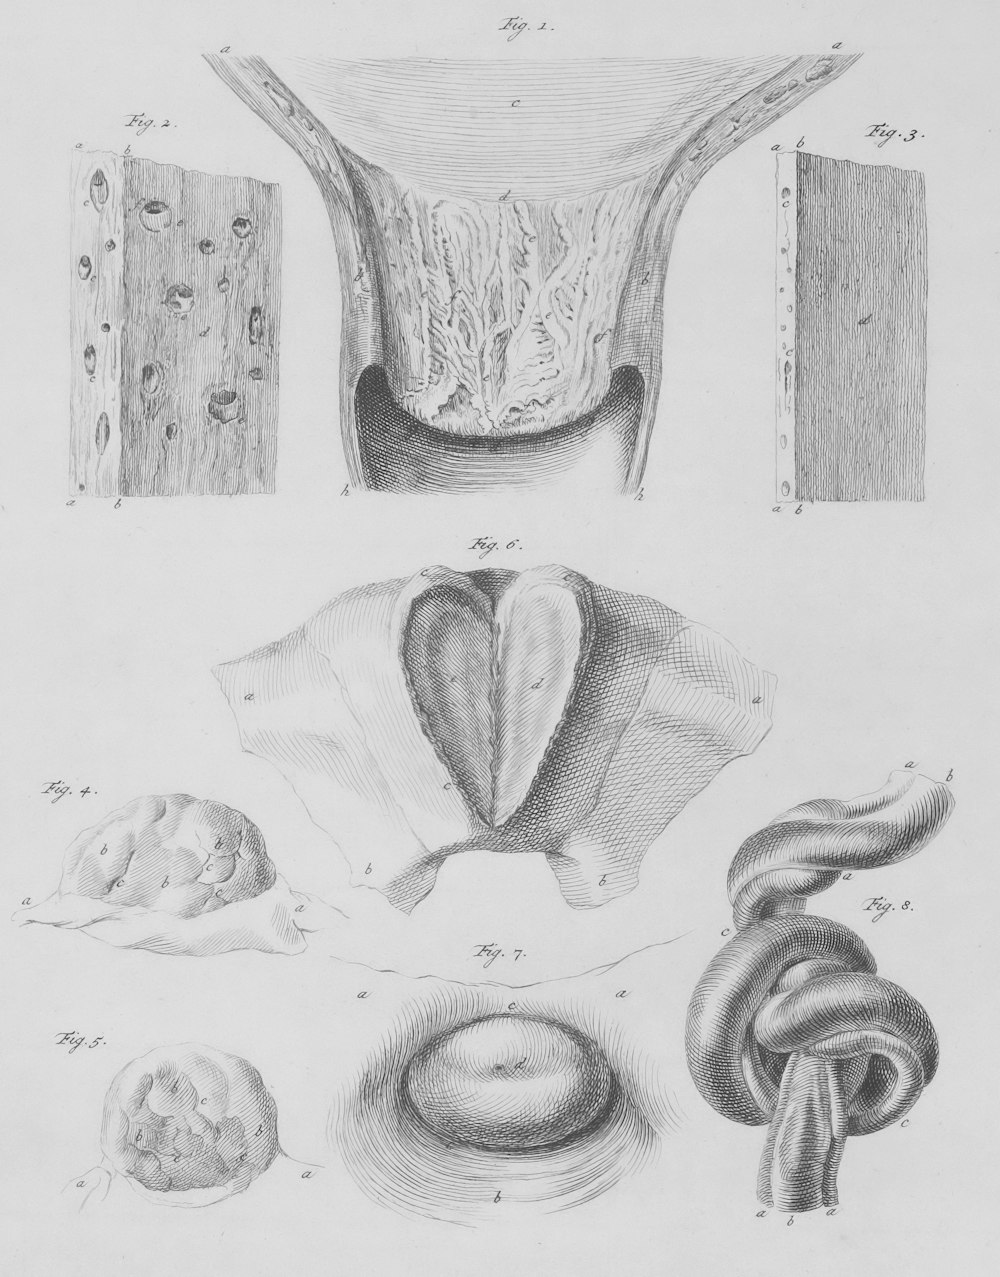 a drawing of different types of utensils